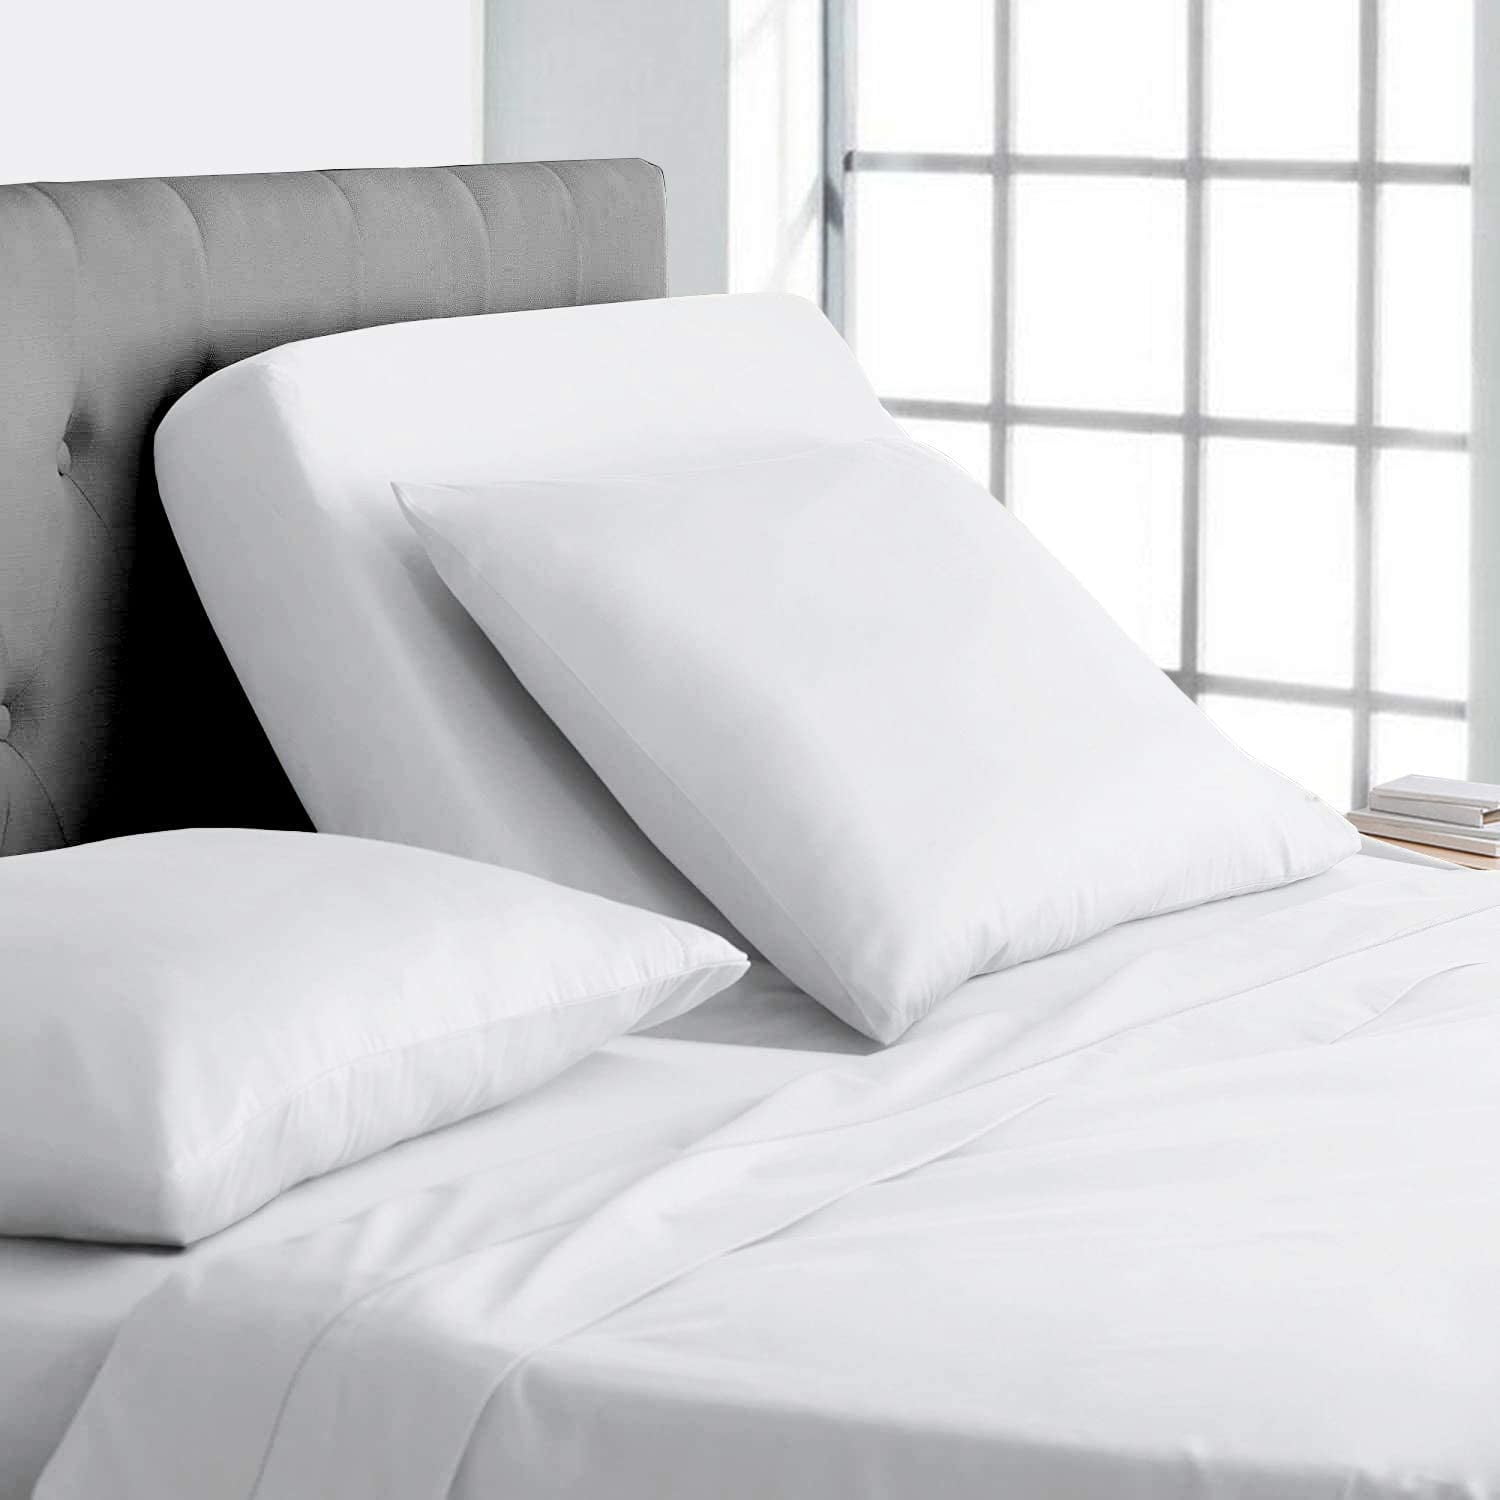 Top Split King Sheets Sets for Adjustable Beds - 800 Thread Count- 100%  Egyptian Cotton 4Pcs Bed Sheets, Fits Upto 21'' Inch Deep Pockets, White  Solid- Split Down 32 inches from The top - Walmart.com